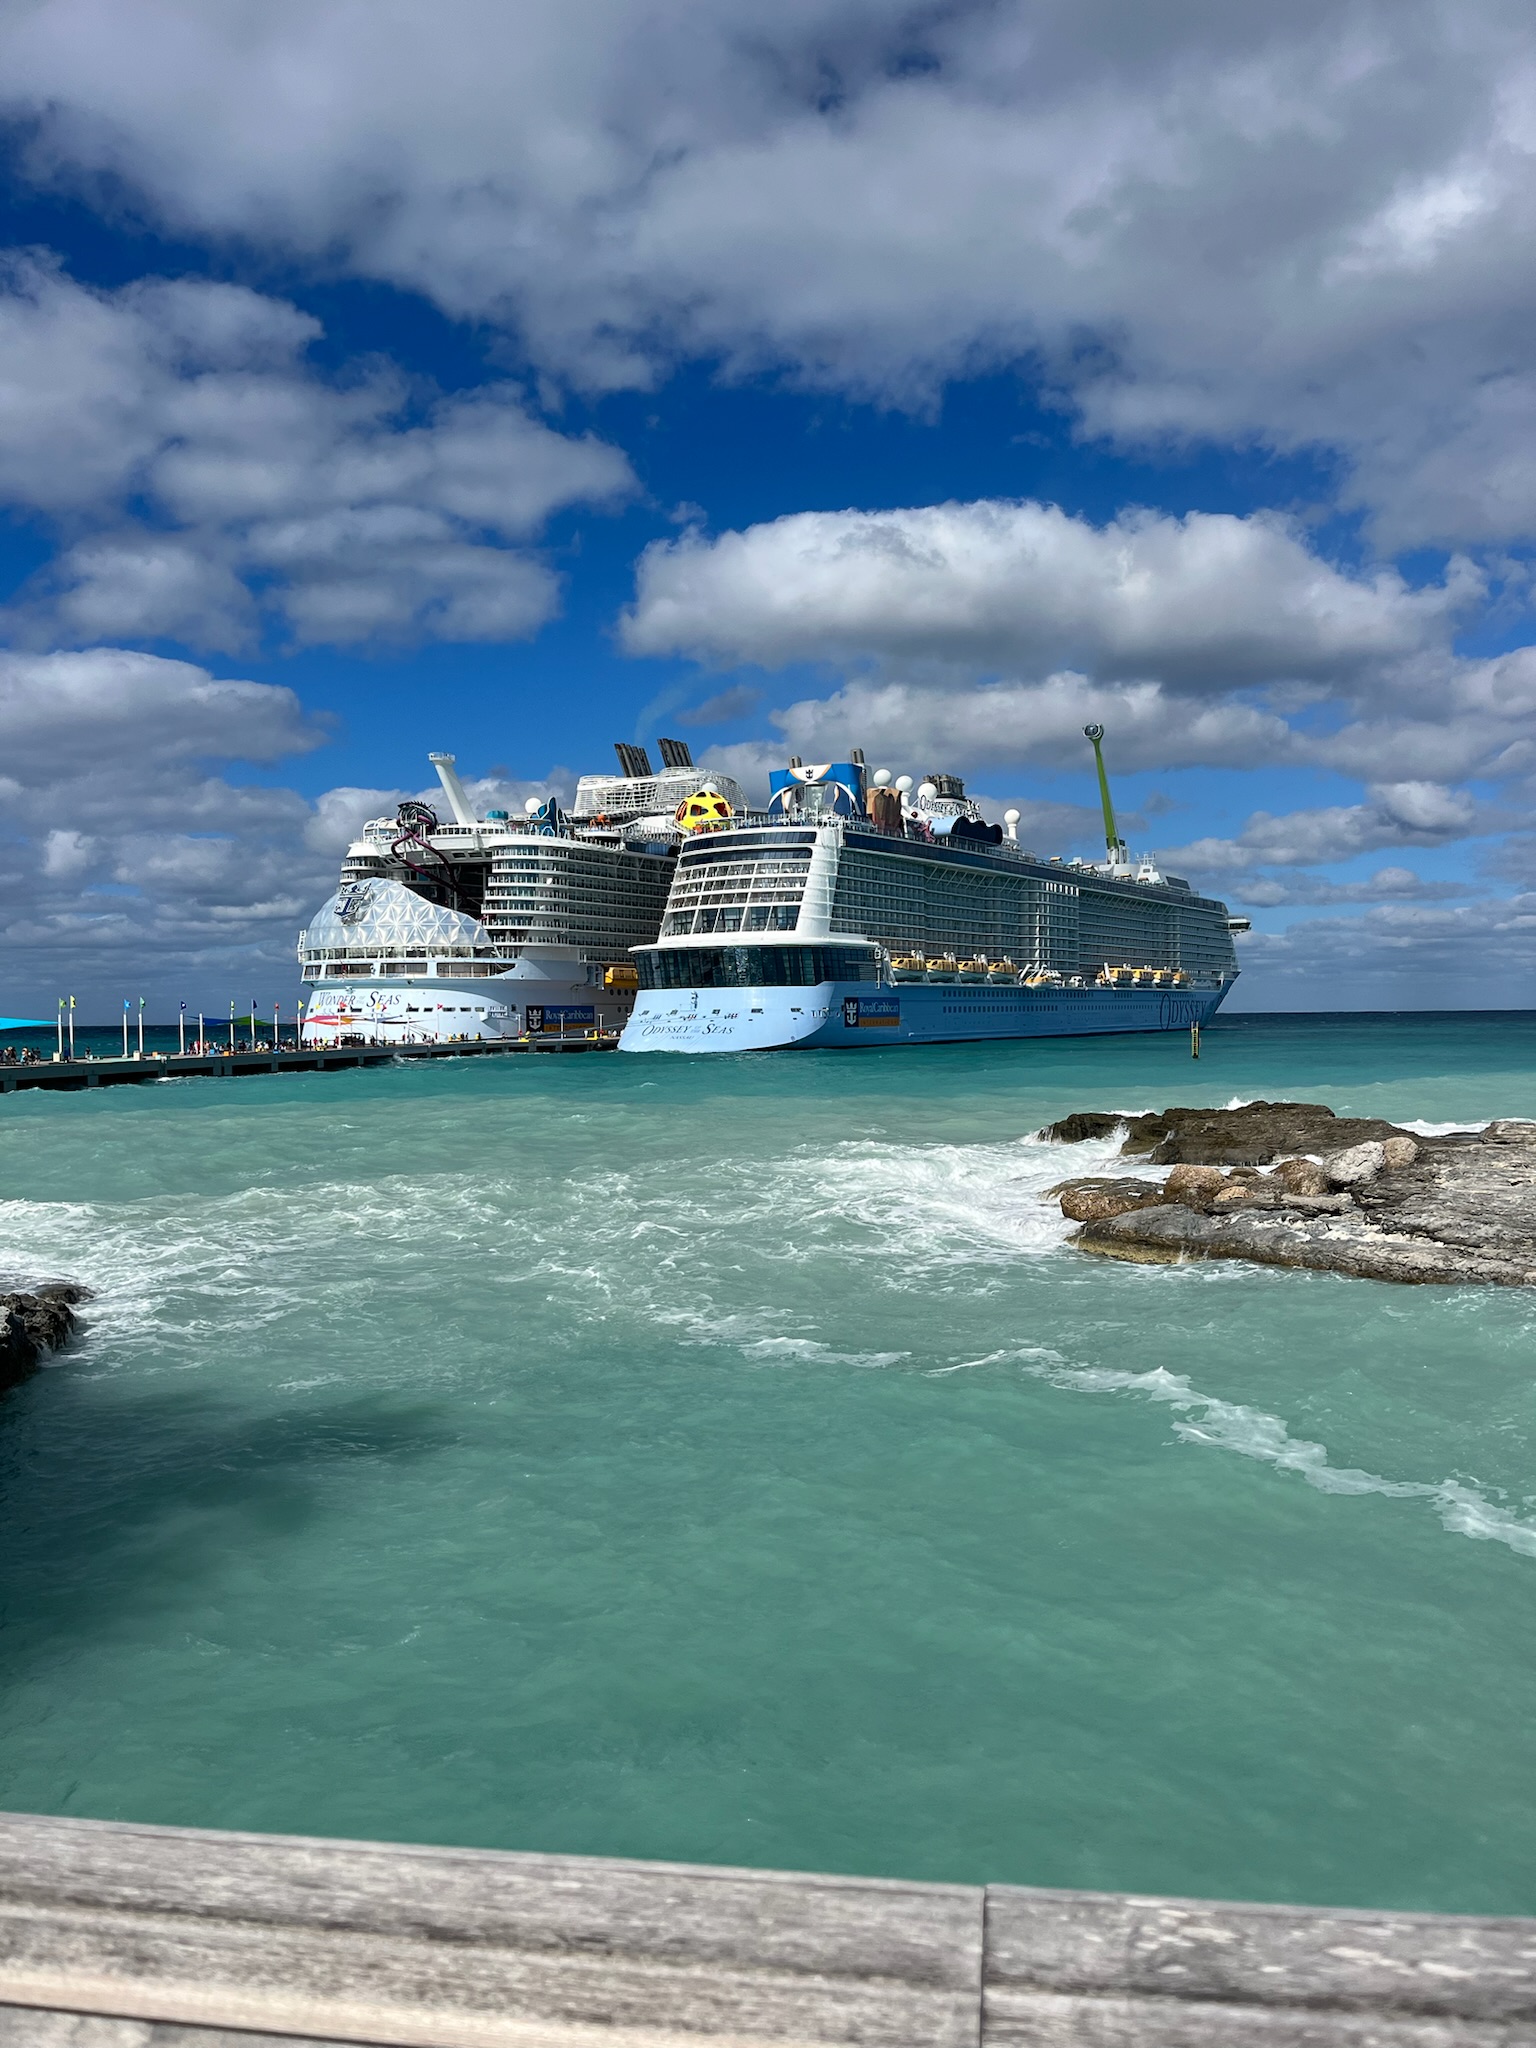 I’ve Booked A Royal Caribbean Cruise, Now What?